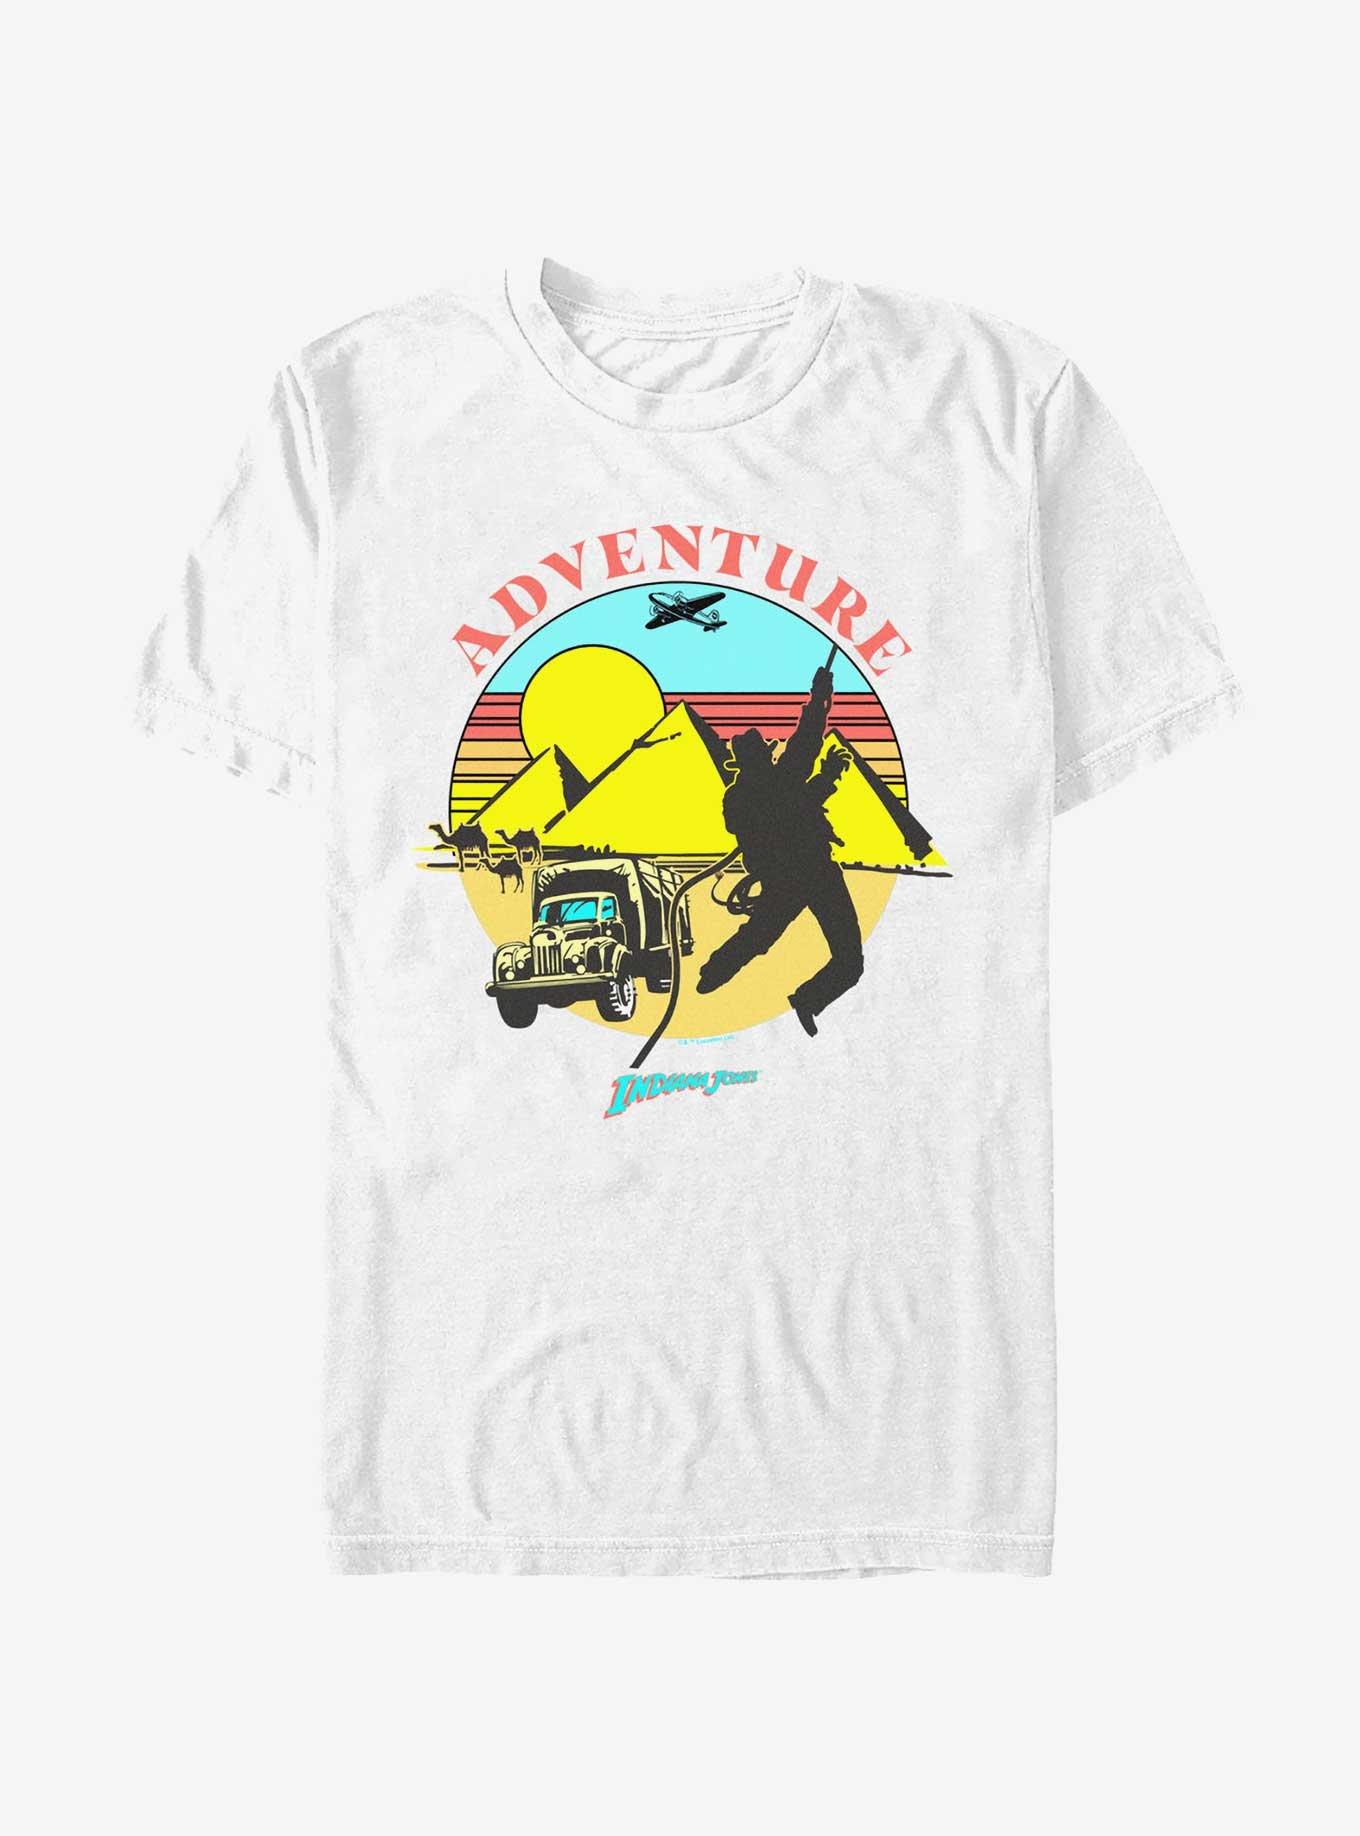 Indiana Jones The Desert Chase Adventure T-Shirt Hot Topic Web Exclusive, WHITE, hi-res